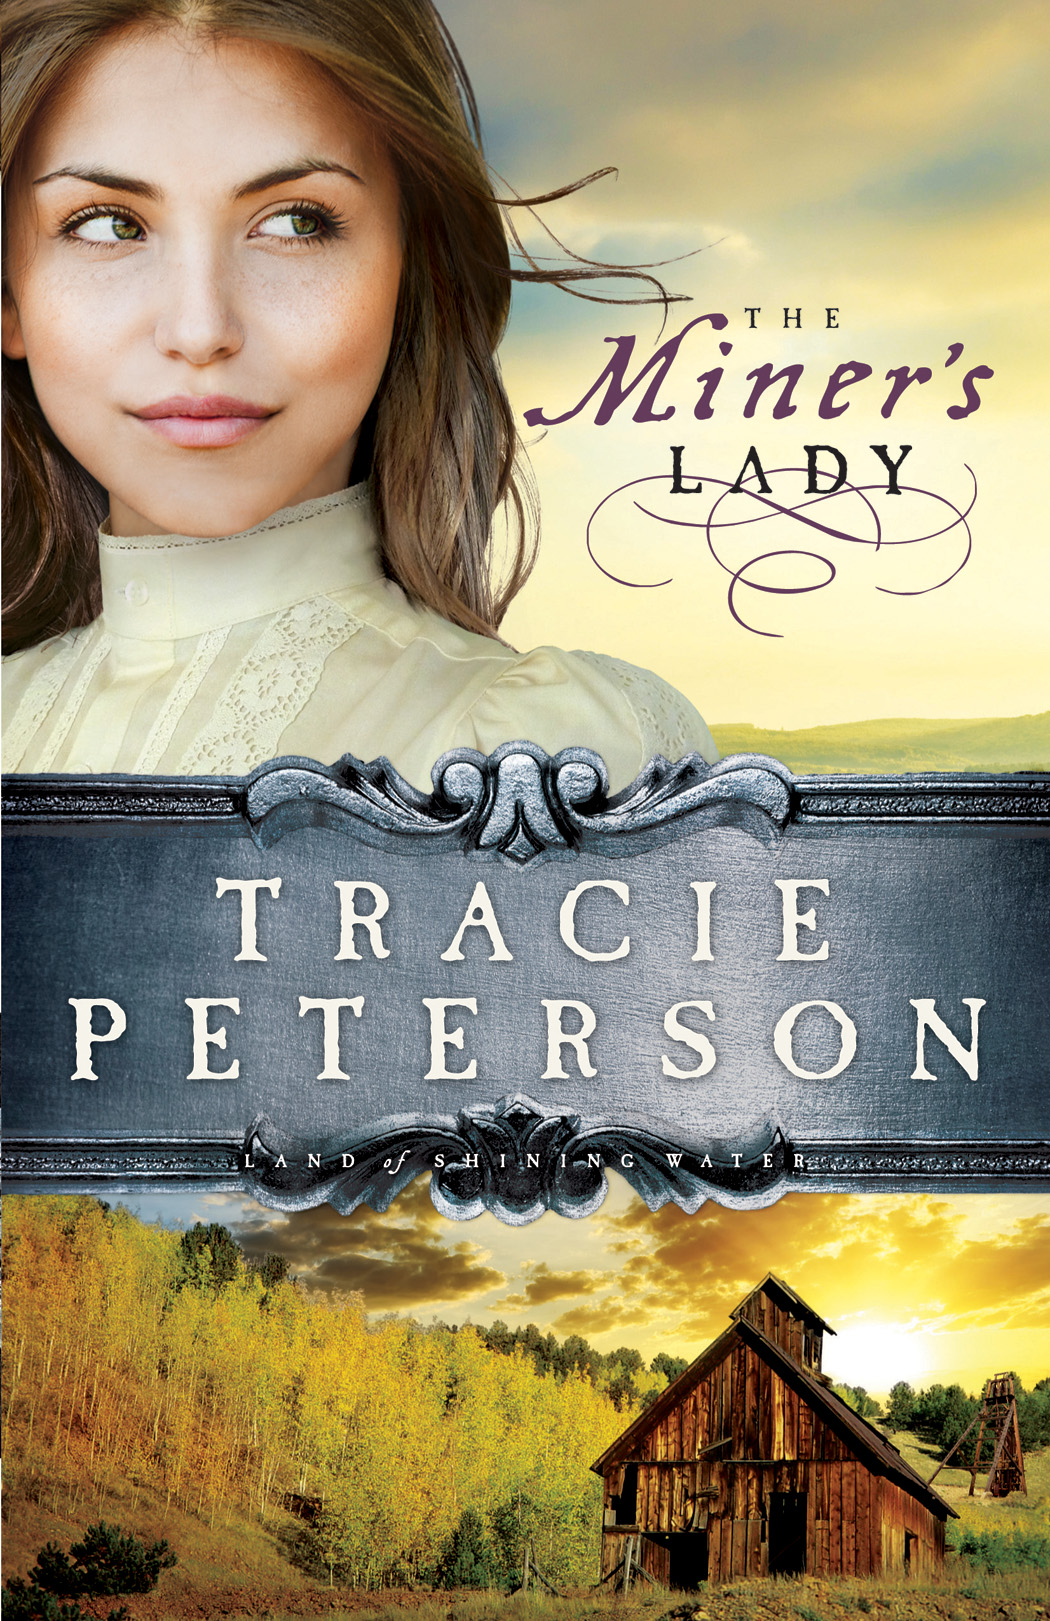 Image de couverture de The Miner's Lady (Land of Shining Water Book #3) [electronic resource] :